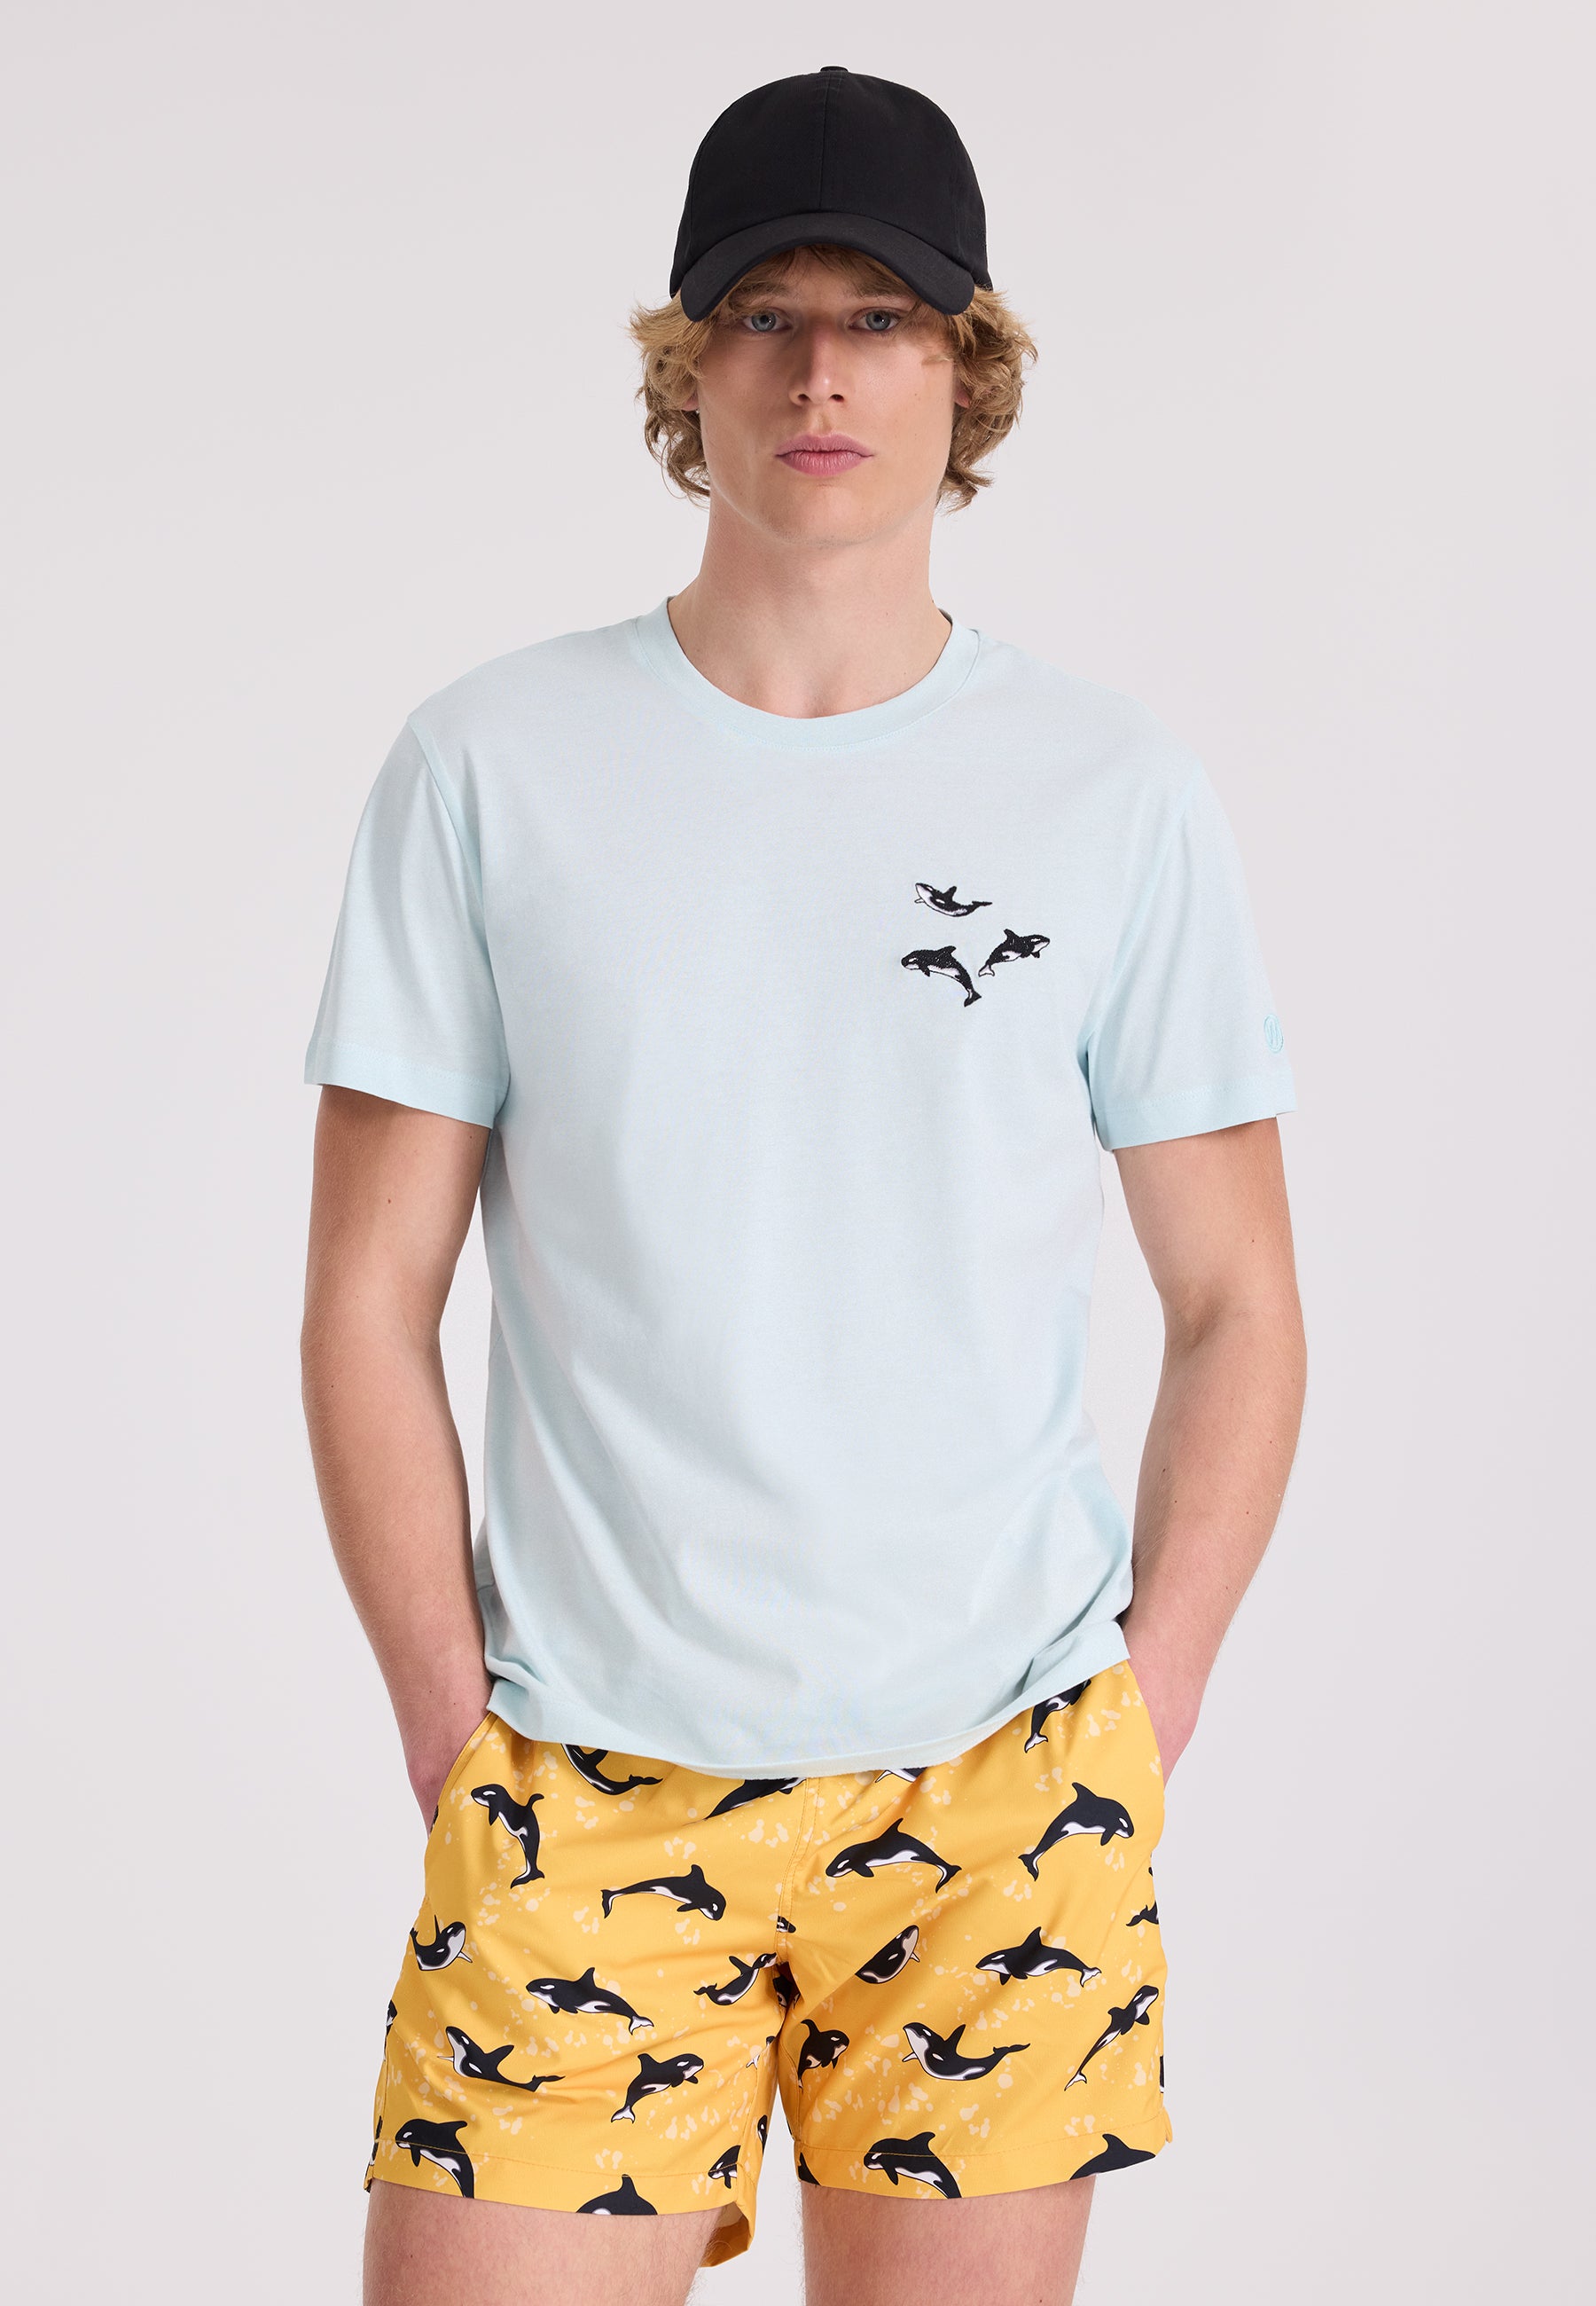 WMEMBROIDERY WHALE TEE in Skylight